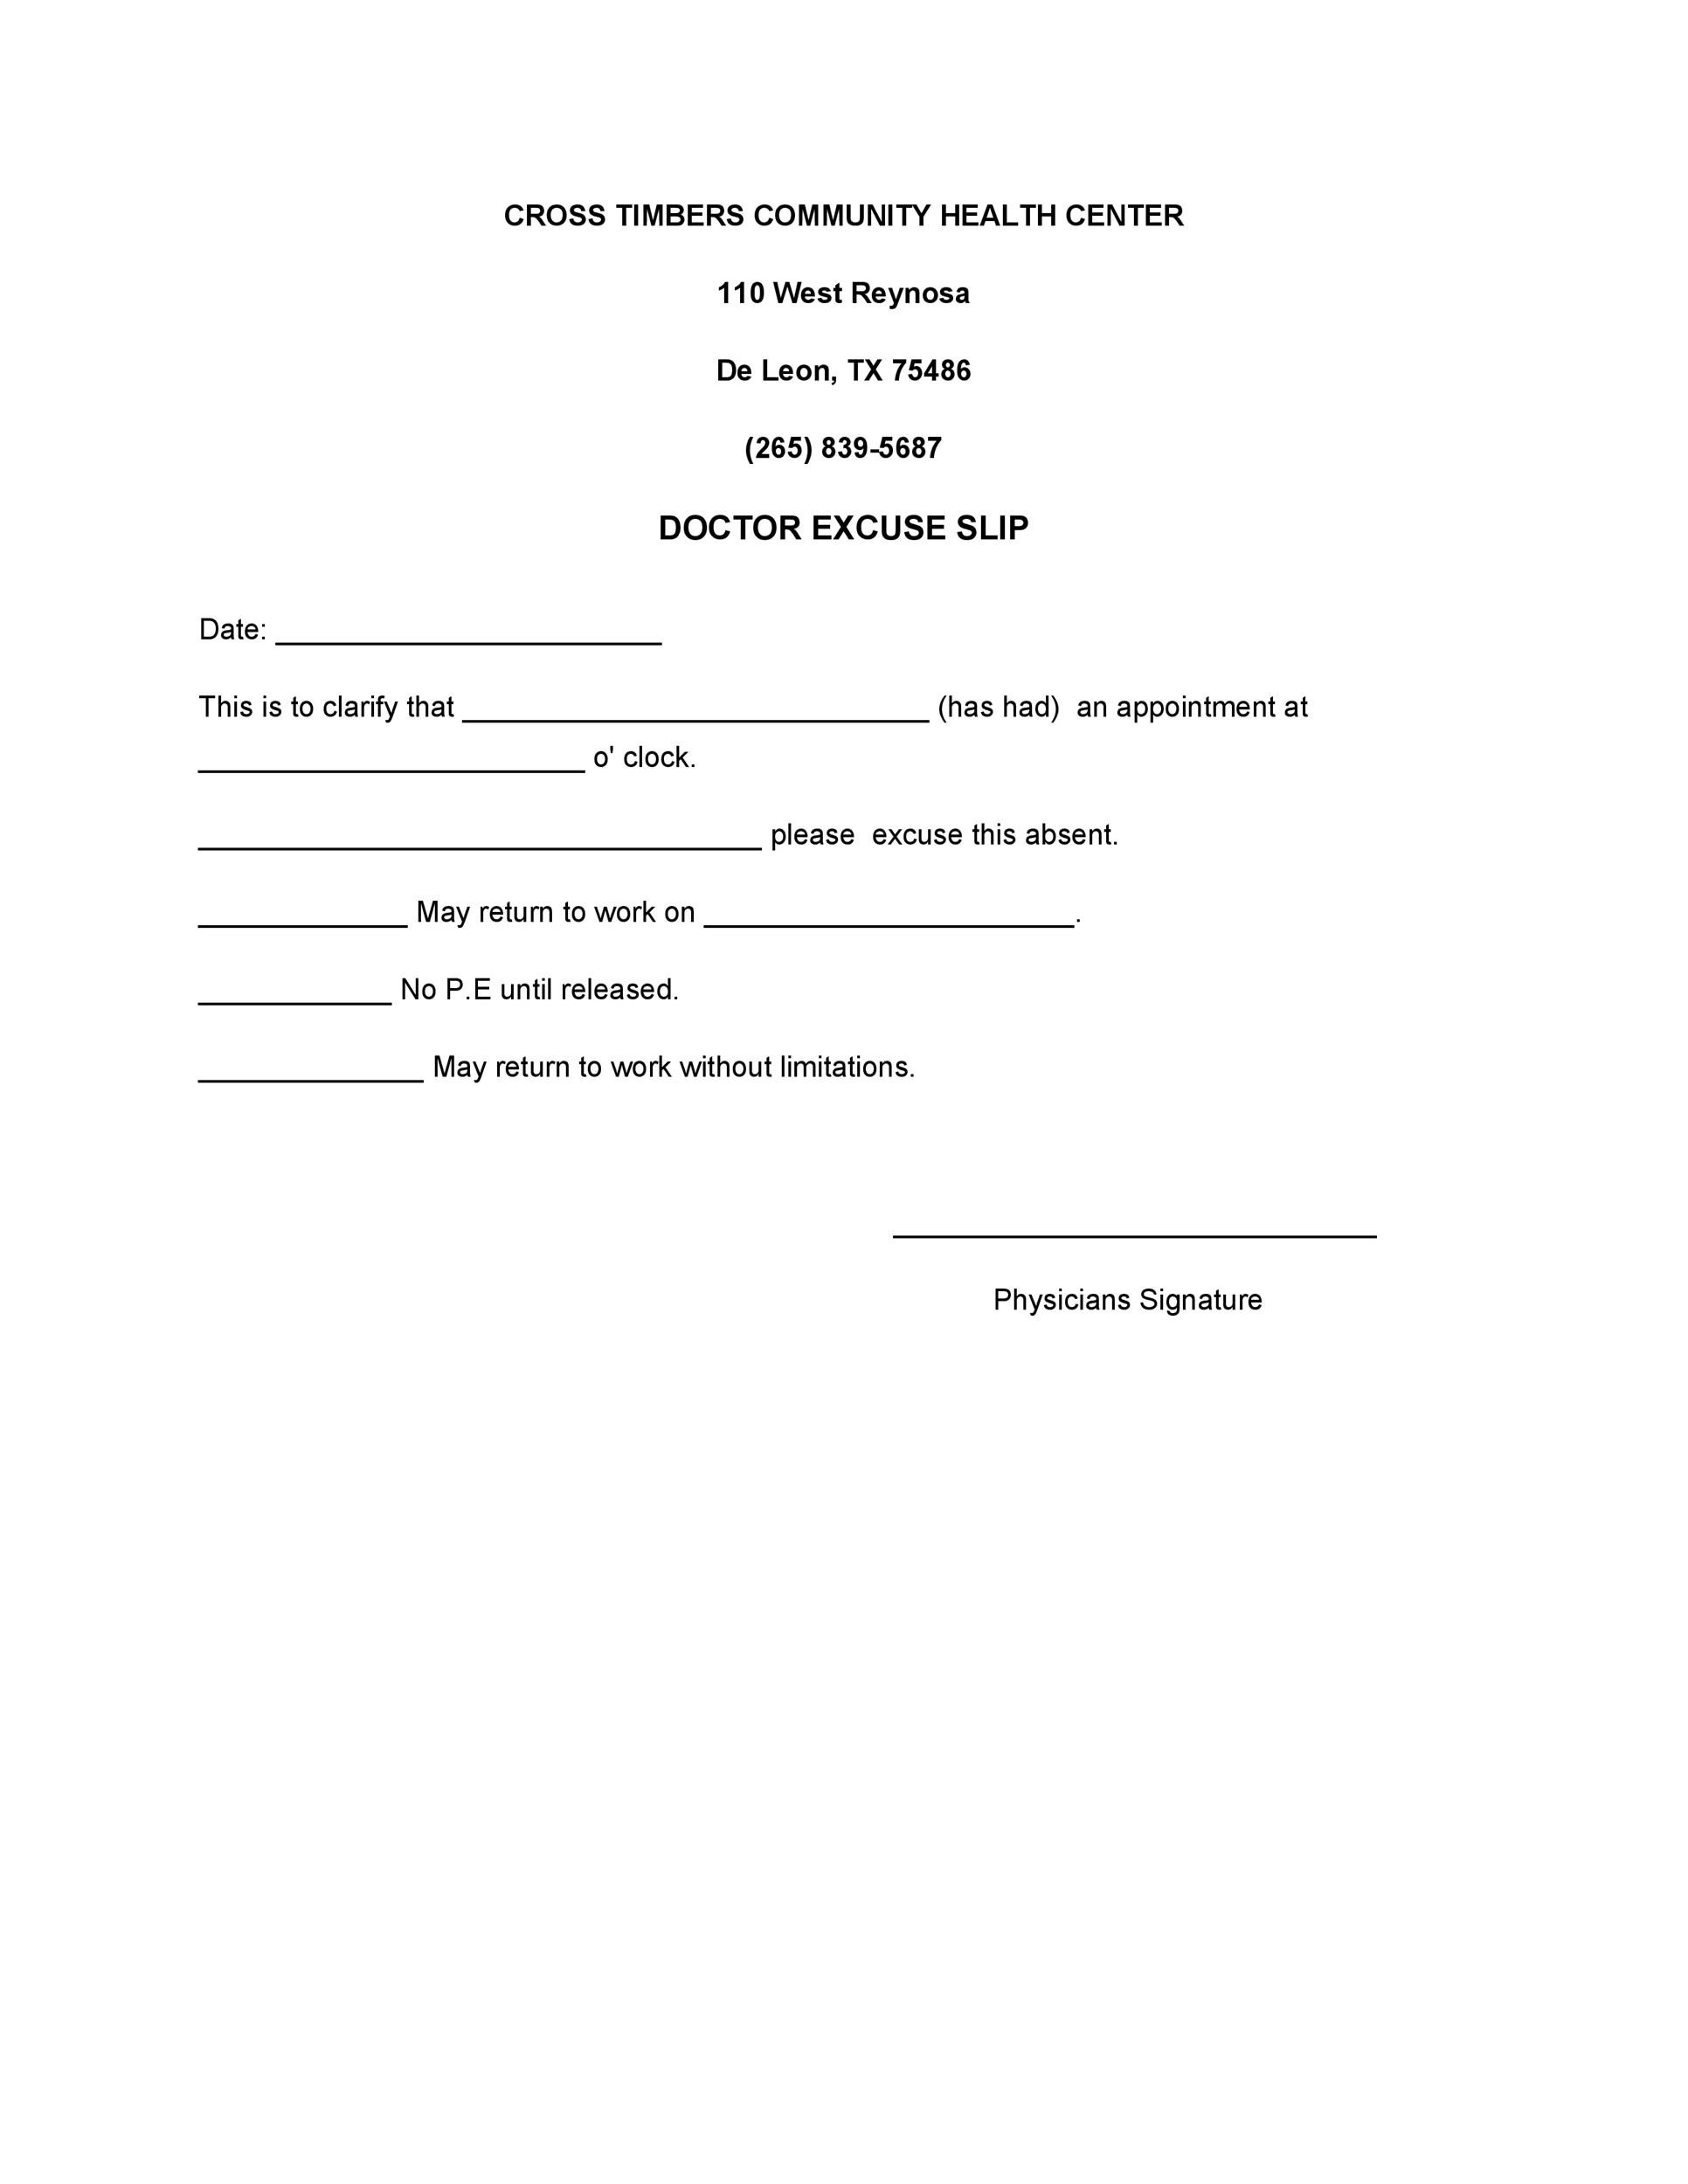 Hospital Note Work Excuse Template Doctors Note Template Doctors